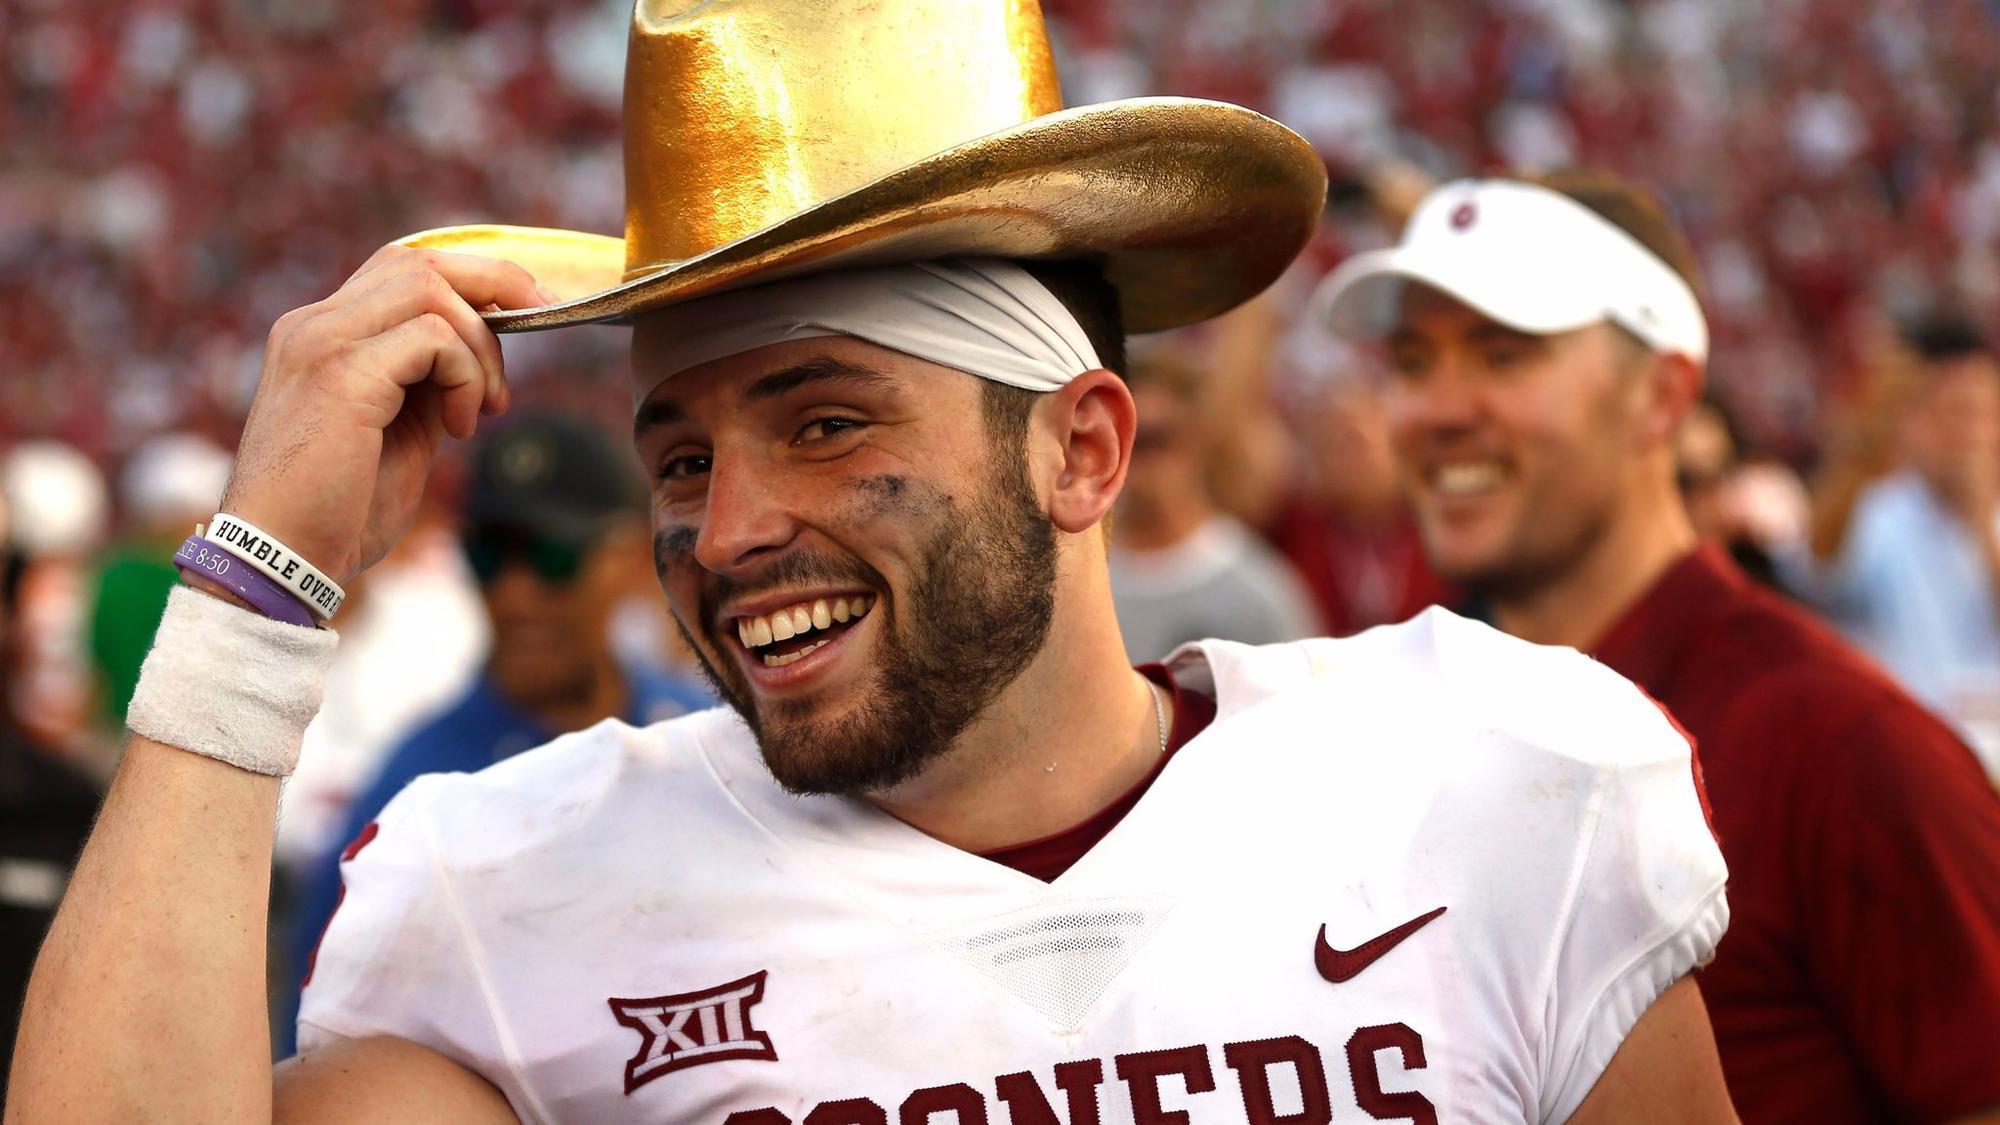 Baker Mayfield an overwhelming Heisman favorite at the end of his